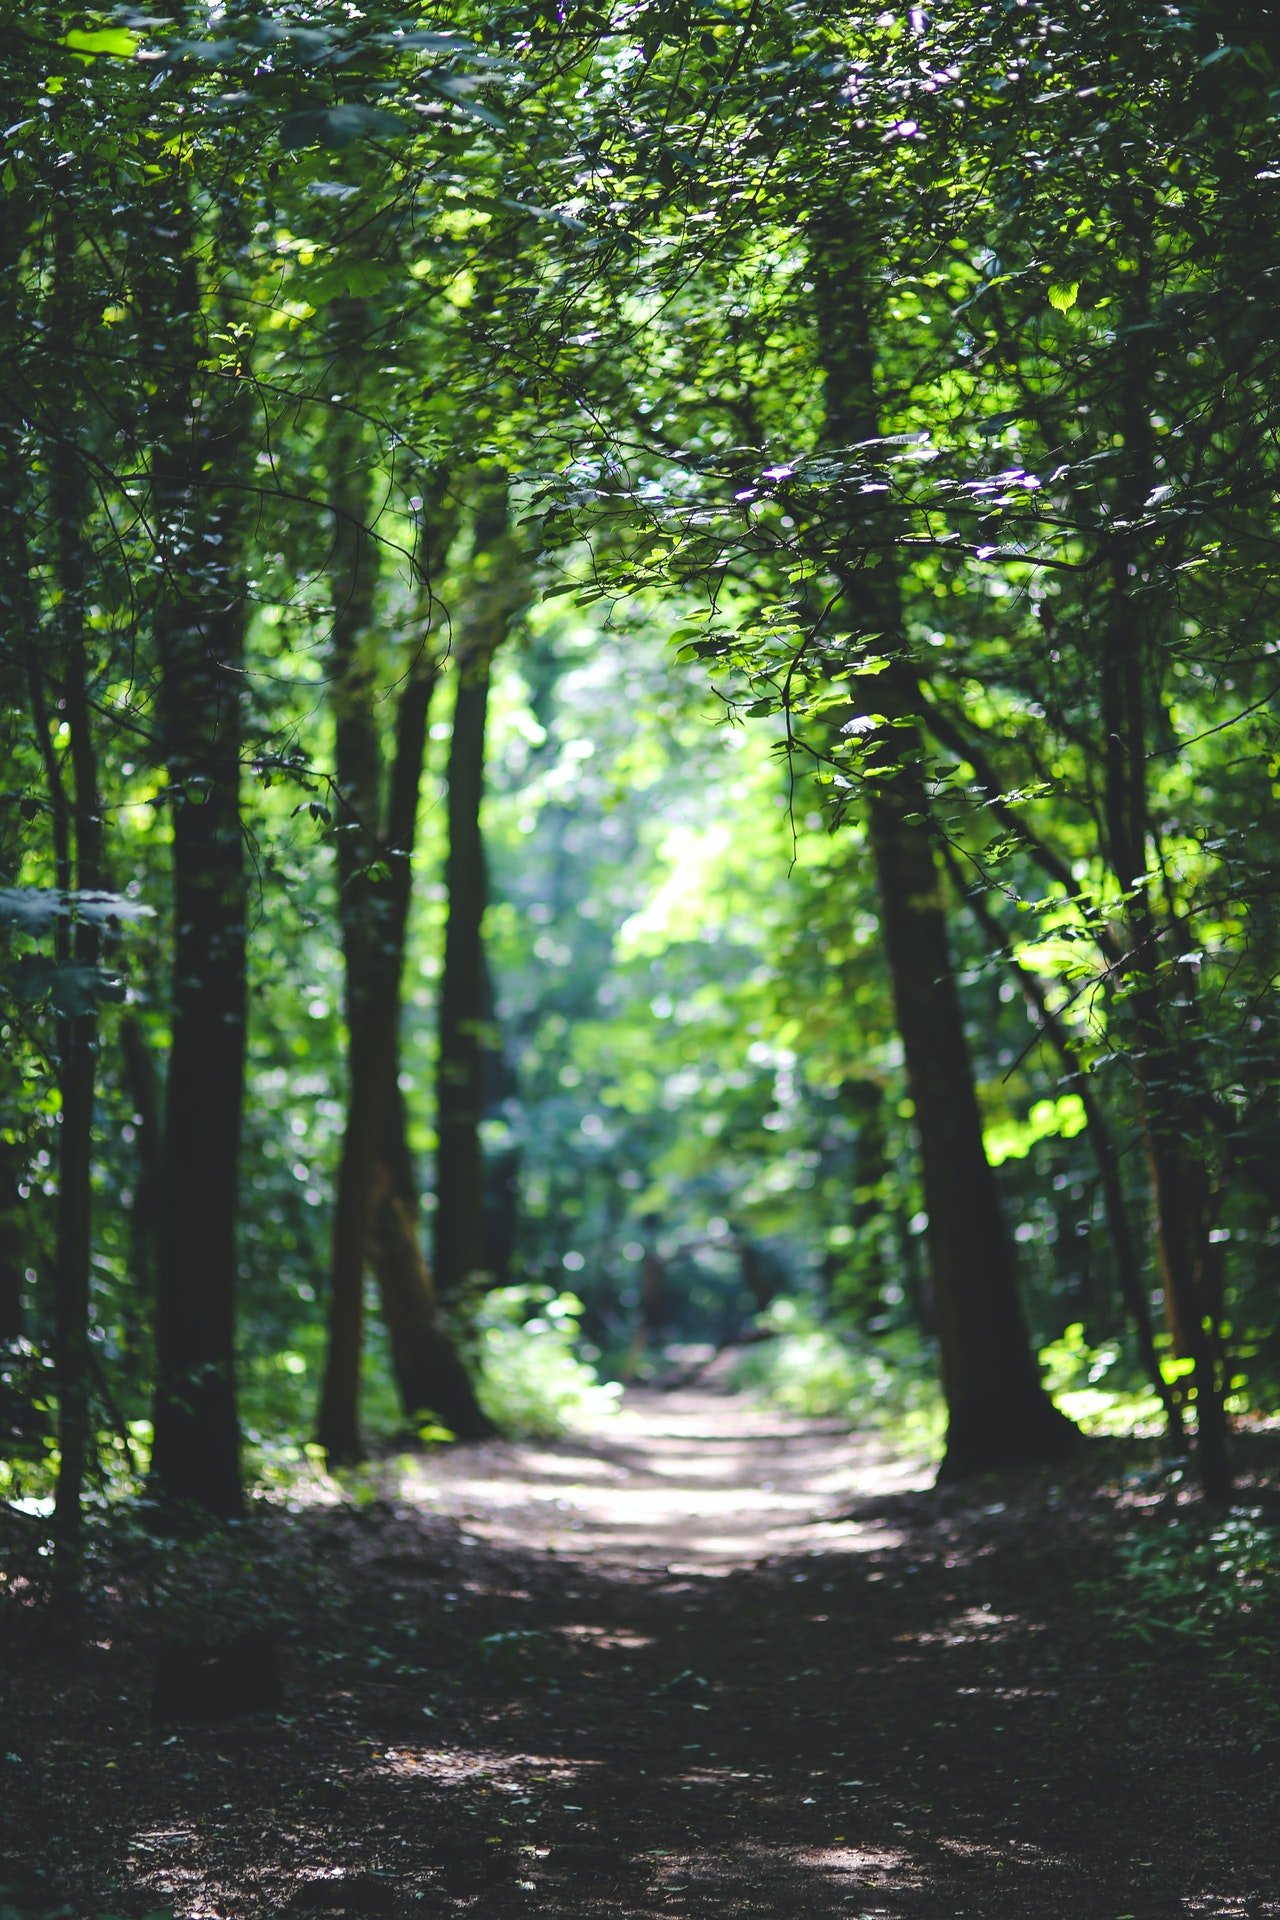 A path into the woods| Photo: Kaboompics .com from Pexels